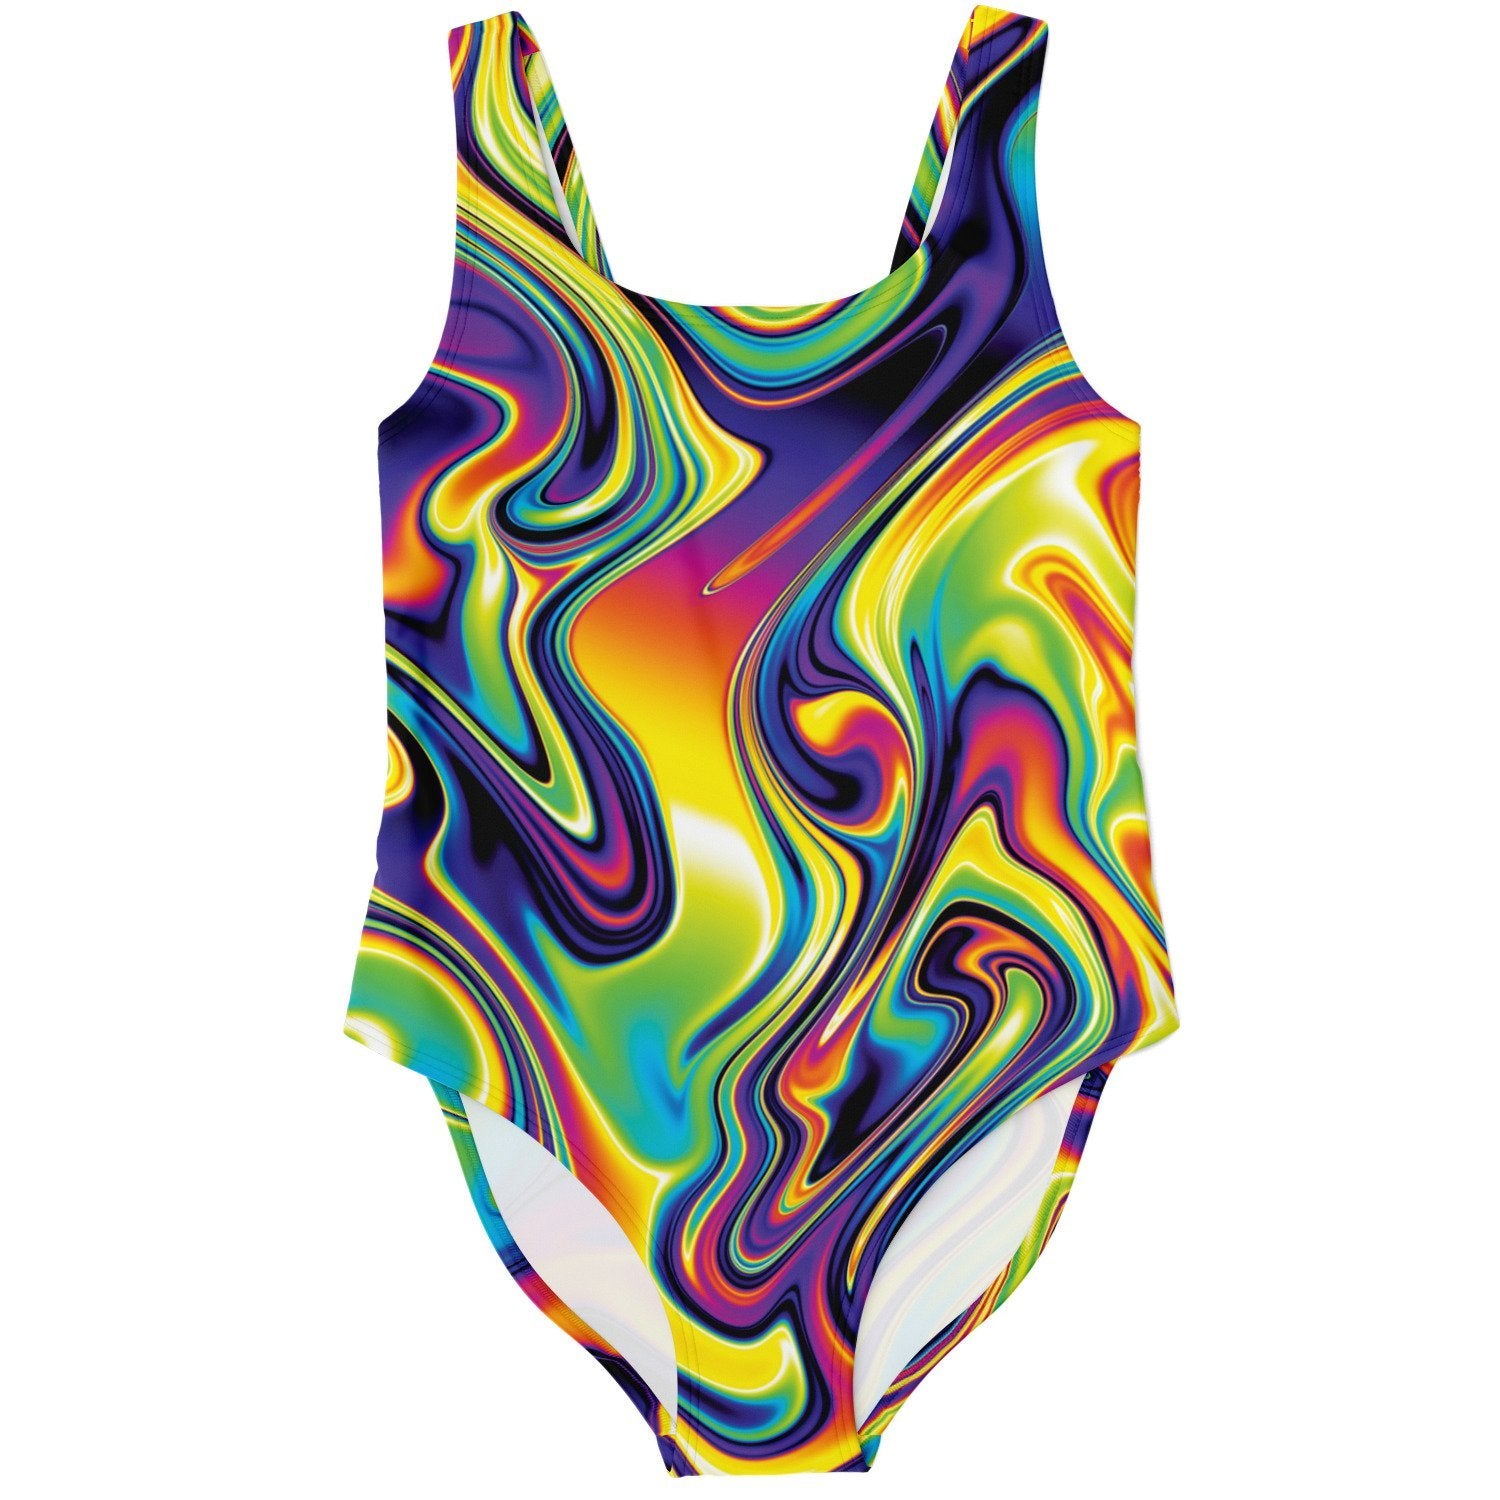 Liquid Psychedelic Waves Print One Piece Swimsuit - kayzers